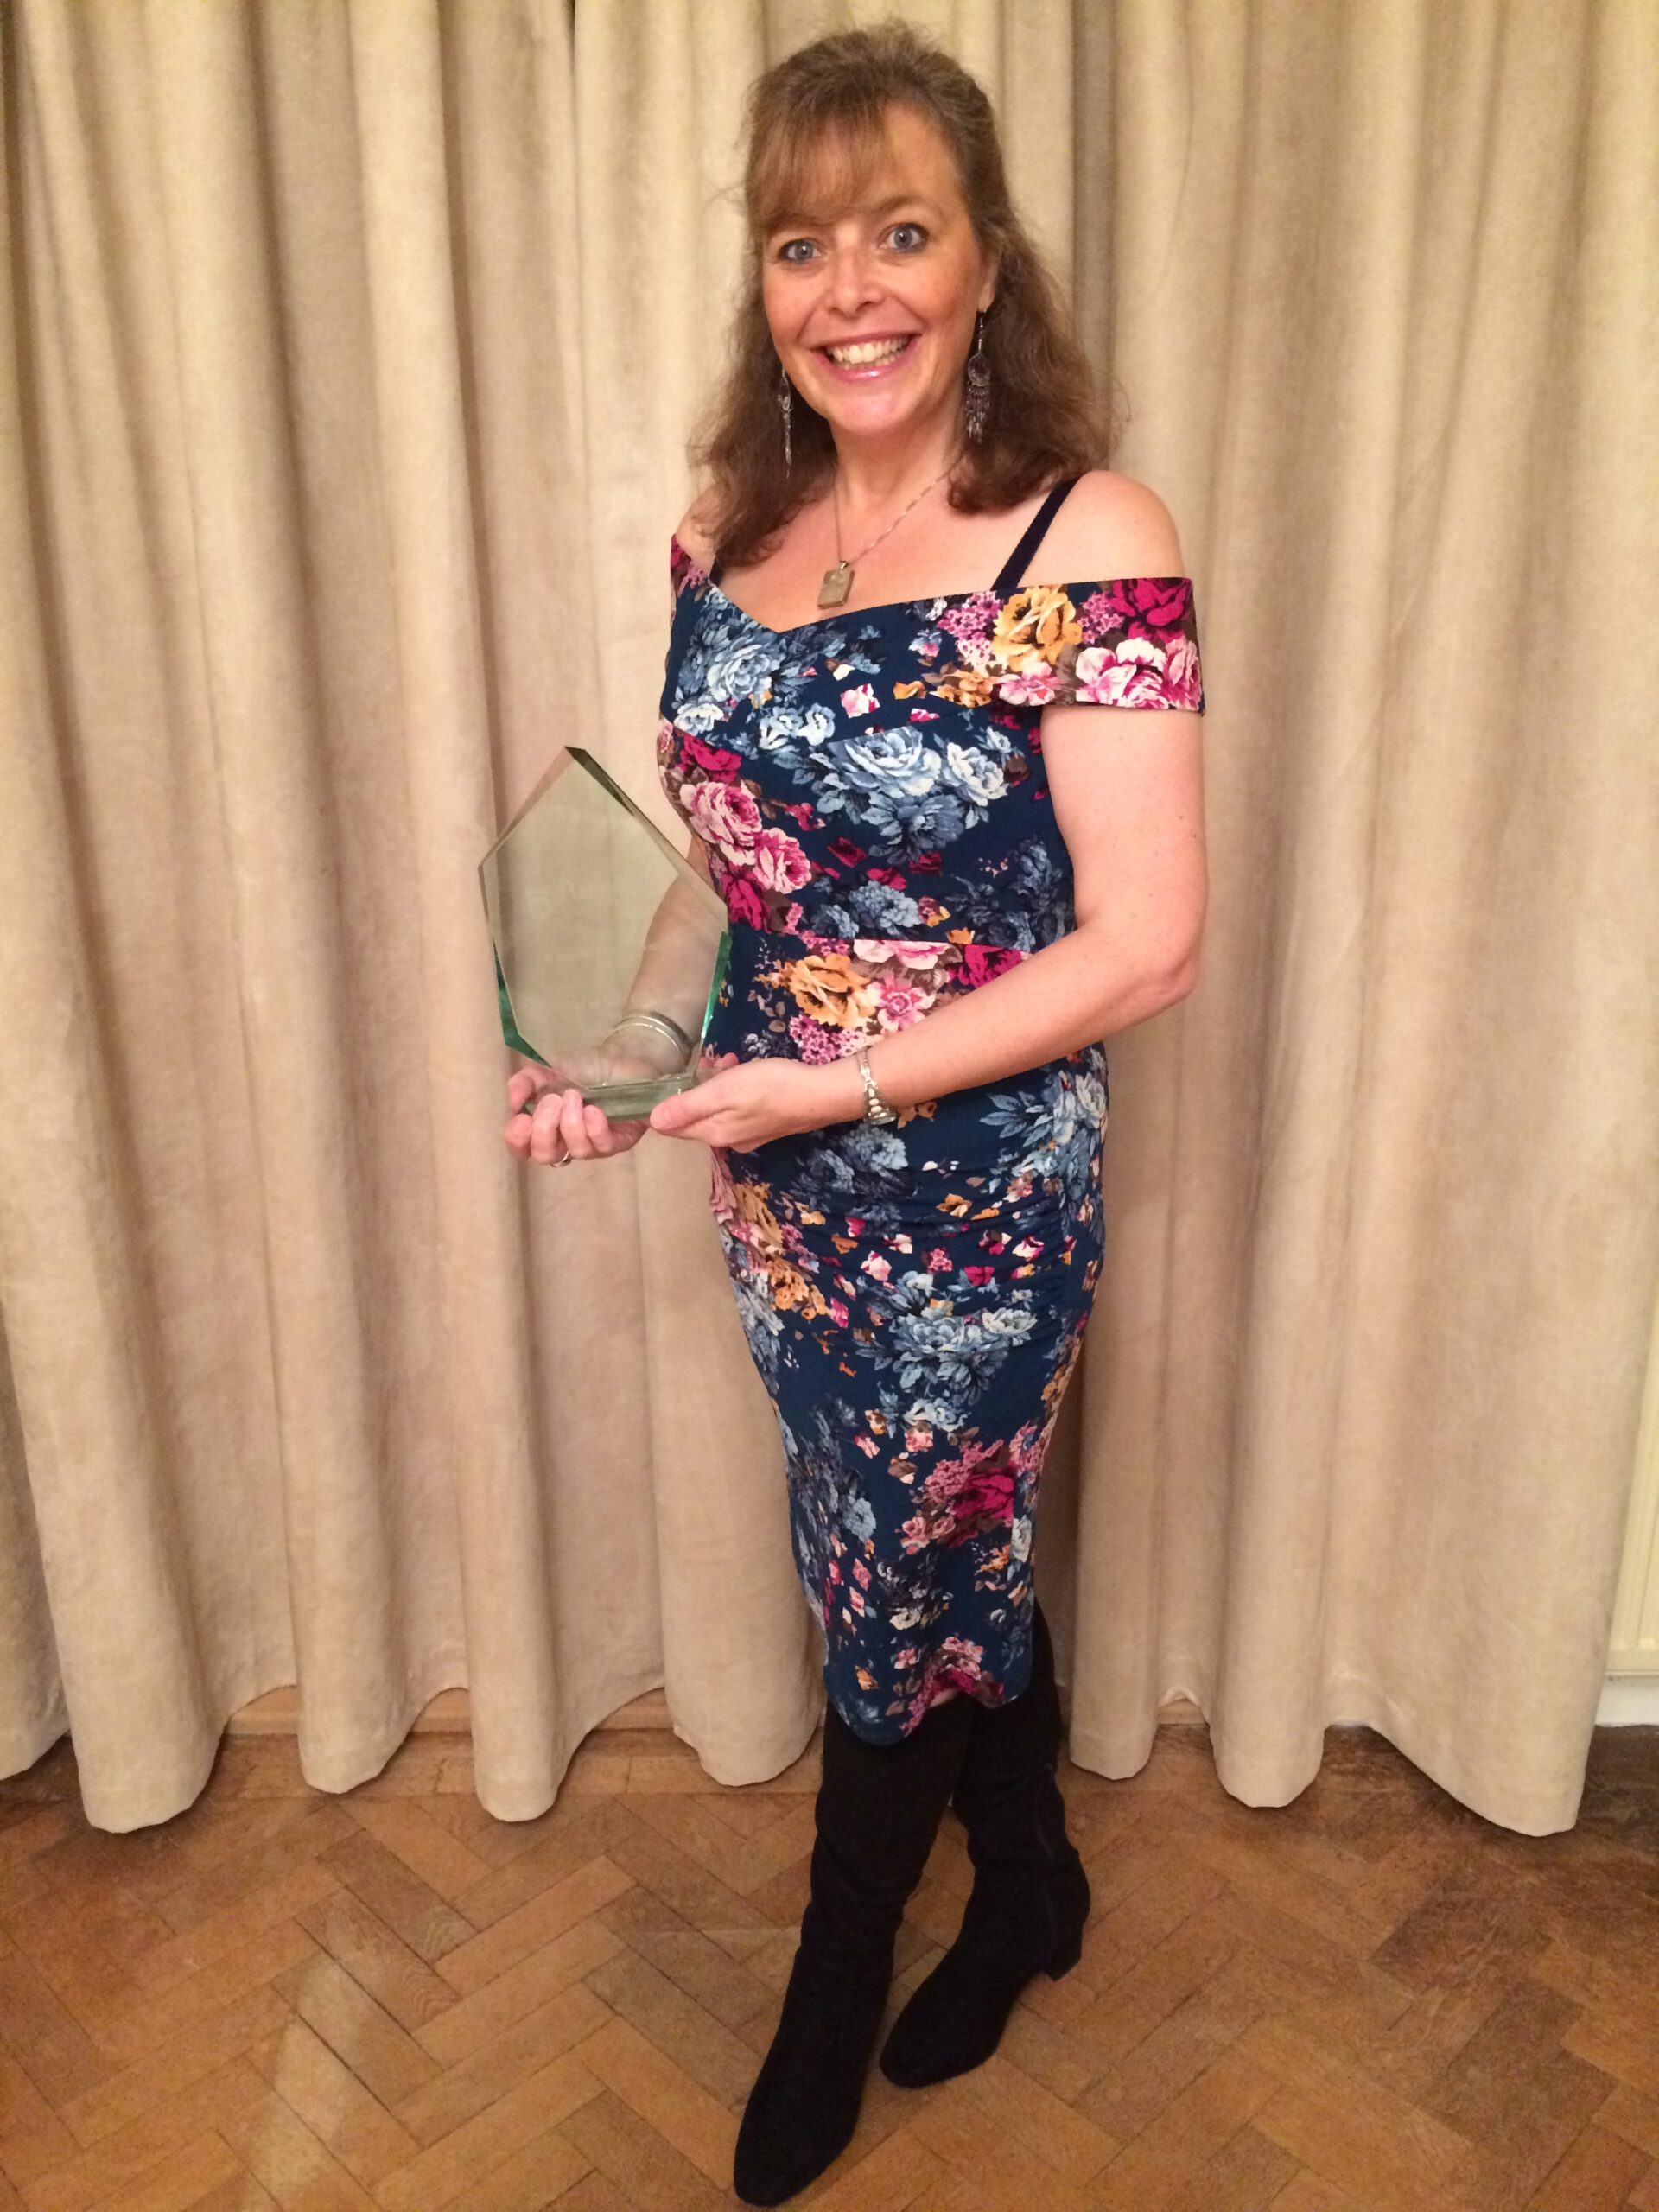 Here I am looking very excited with my award!